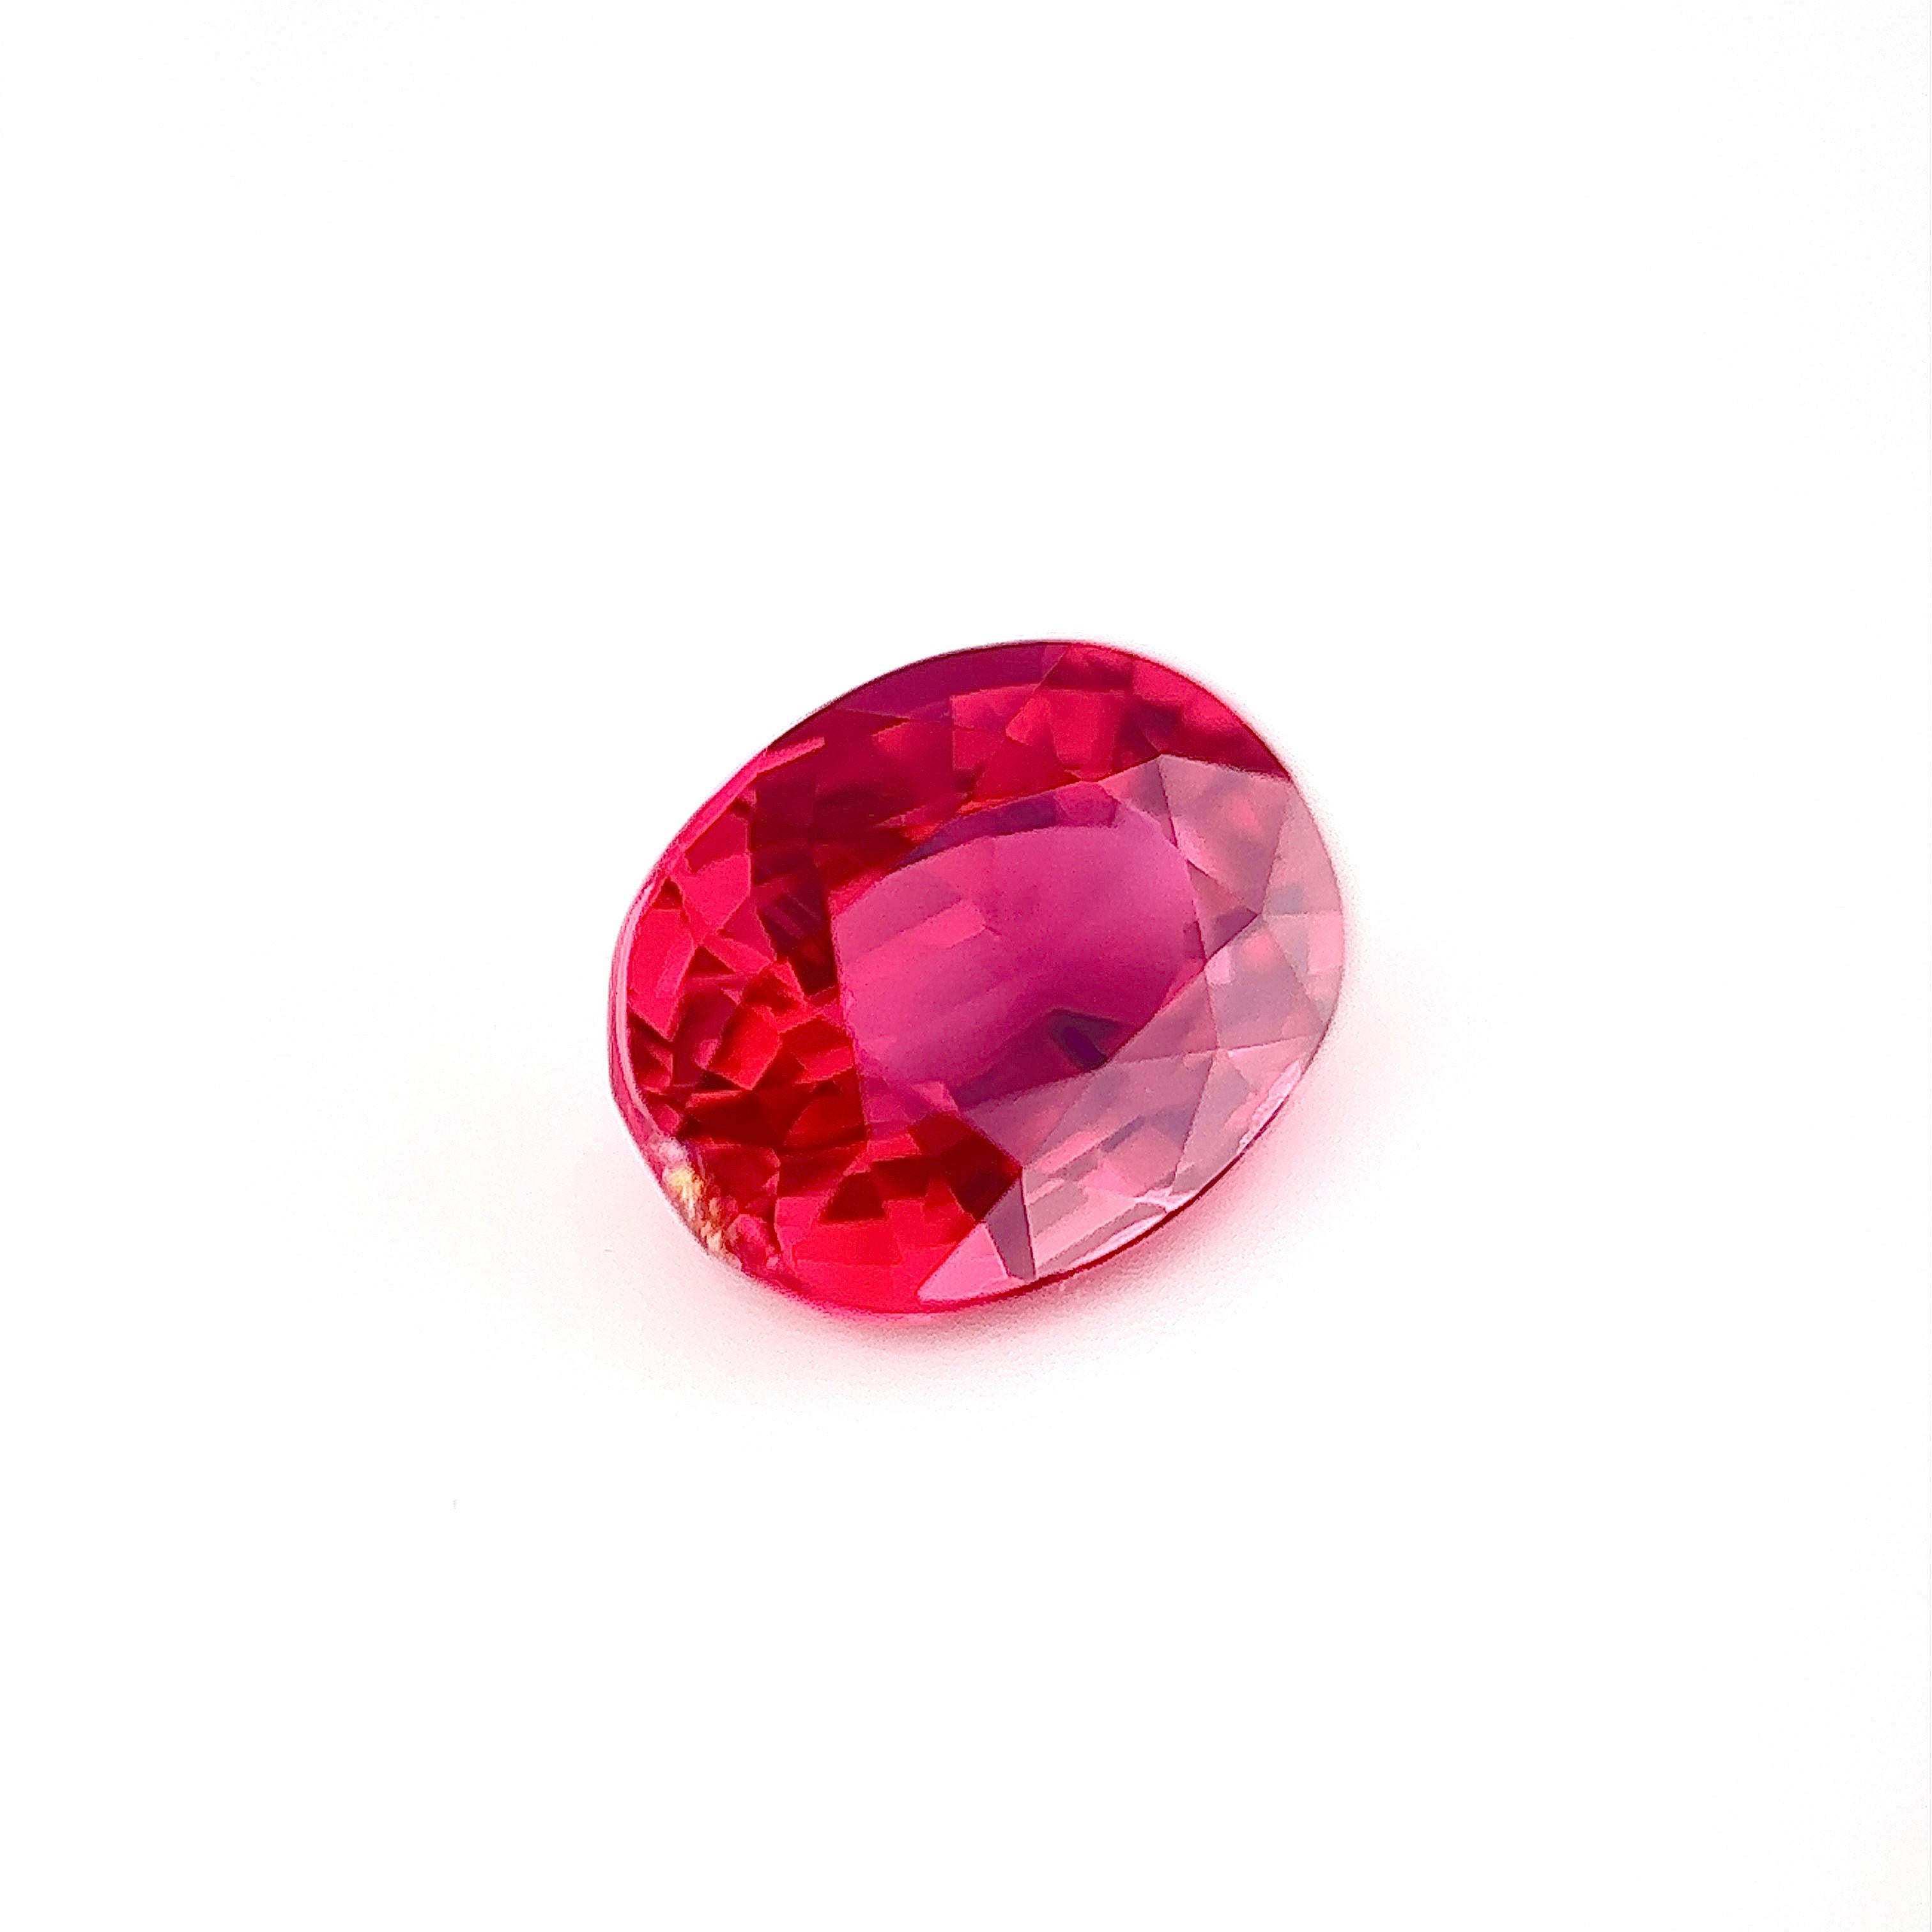 Natural Ruby Loose Stone in Pigeon Blood

2.06 carat, unheated

GRS/GCS appointed lab certificate can be arranged upon request

To design your own jewellery, Xuelai Jewellery London offers a world-class bespoke experience for private clients; please